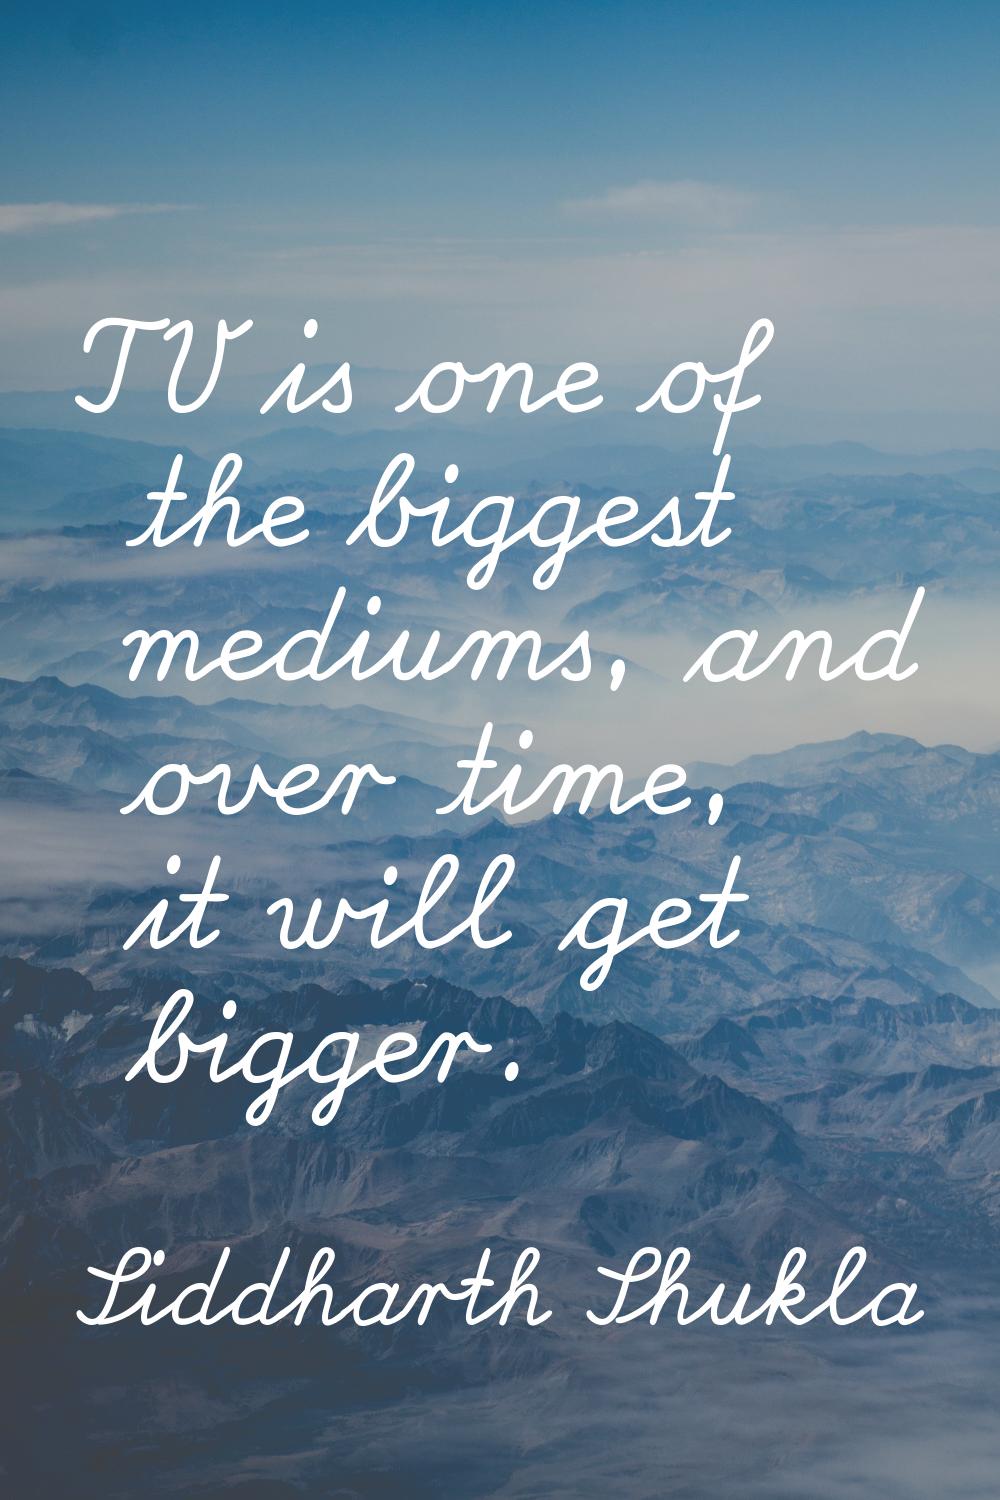 TV is one of the biggest mediums, and over time, it will get bigger.